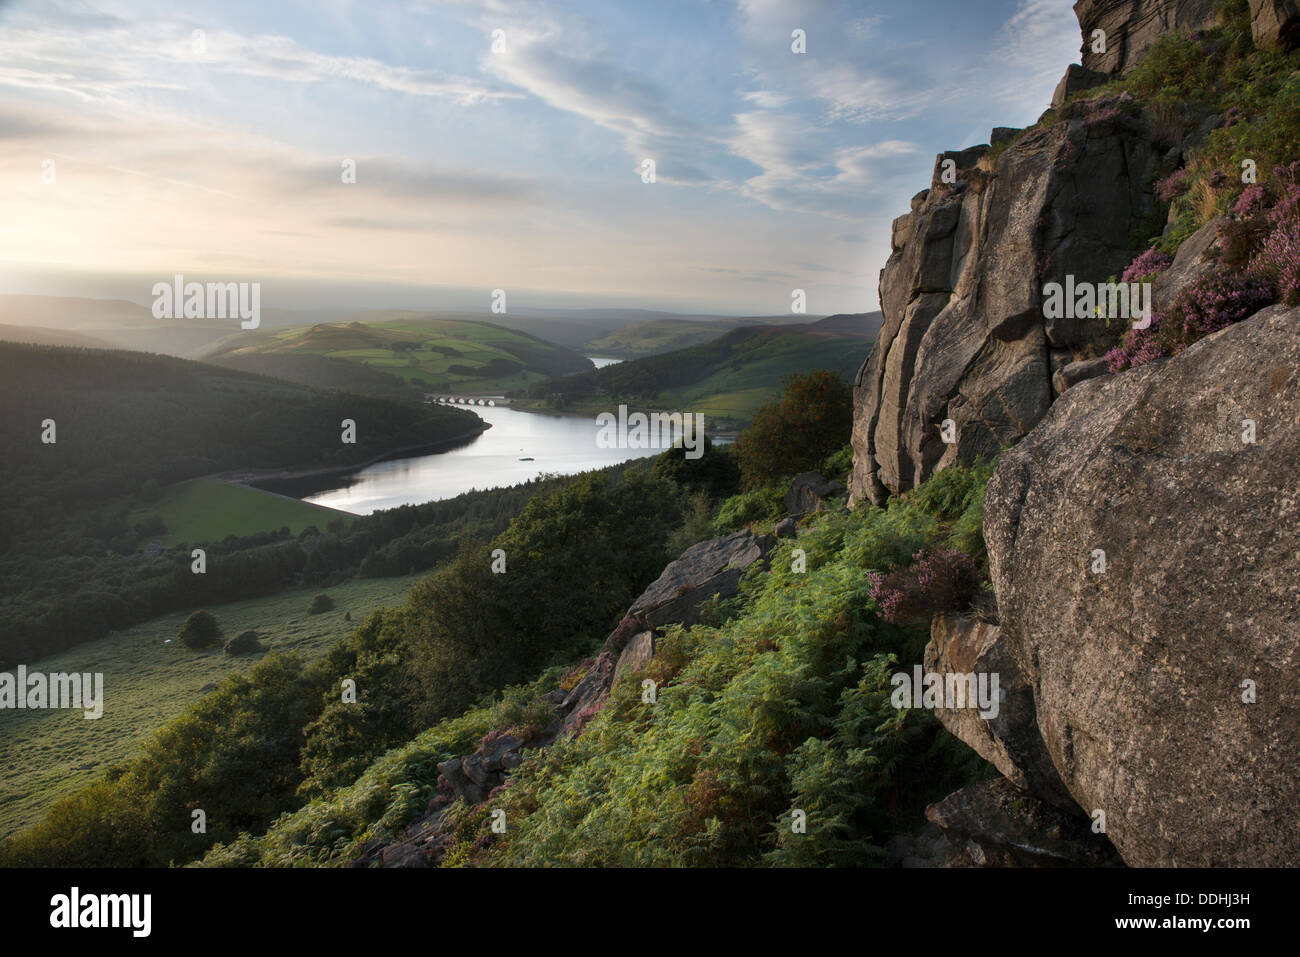 A view of Ladybower Reservoir and Derwent Reservoir, viewed from Bamford Edge, Peak District, Derbyshire Stock Photo